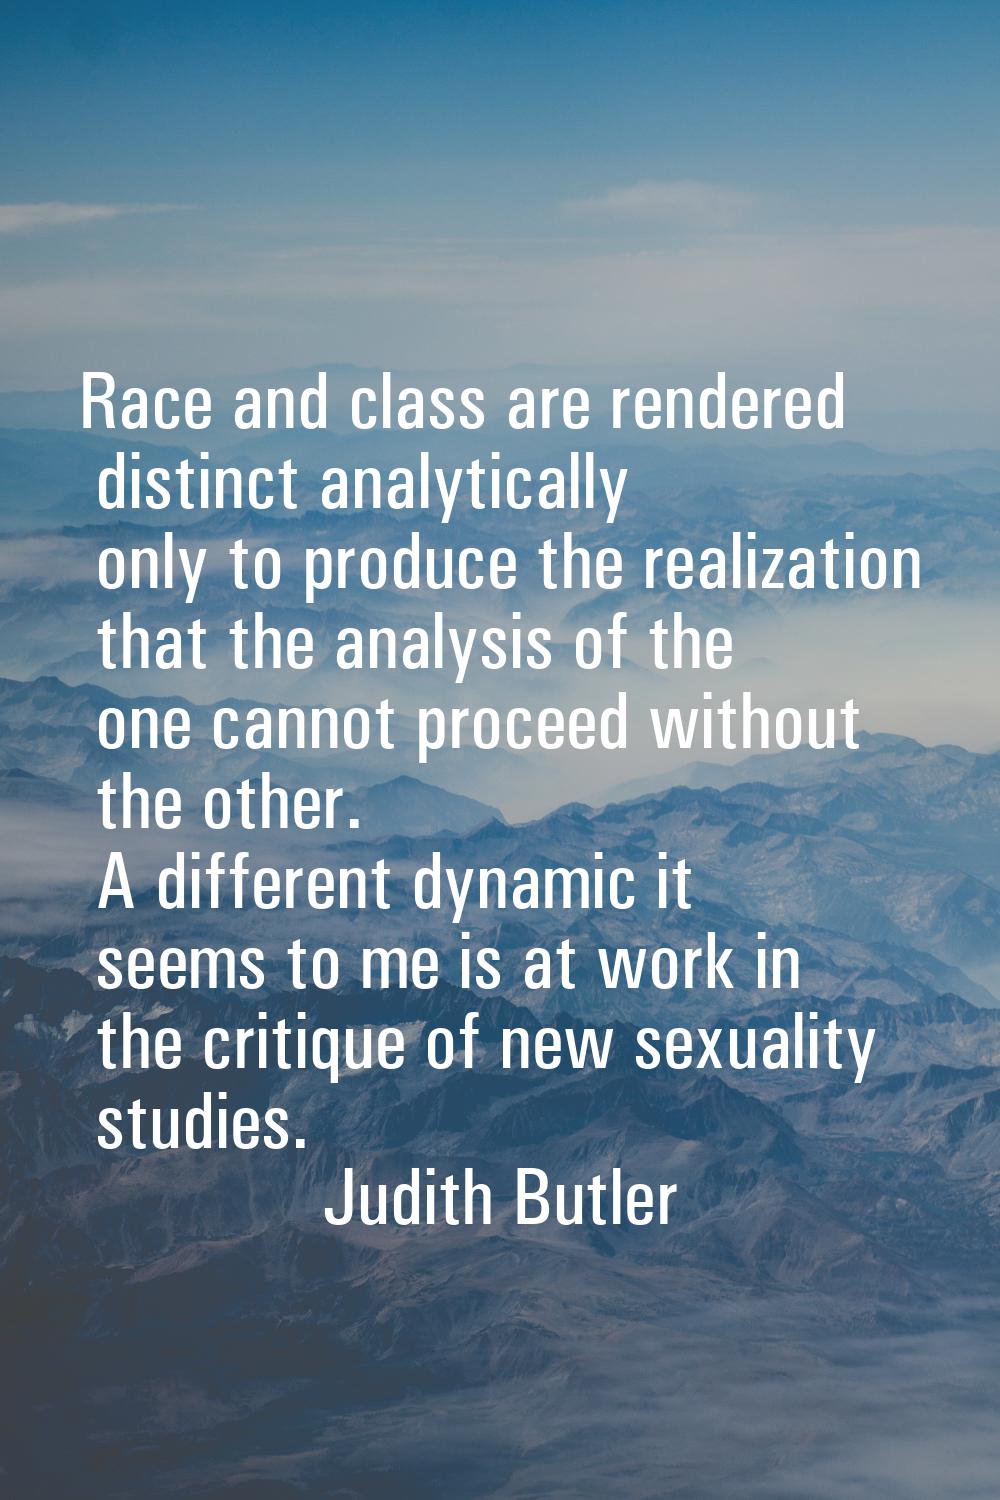 Race and class are rendered distinct analytically only to produce the realization that the analysis